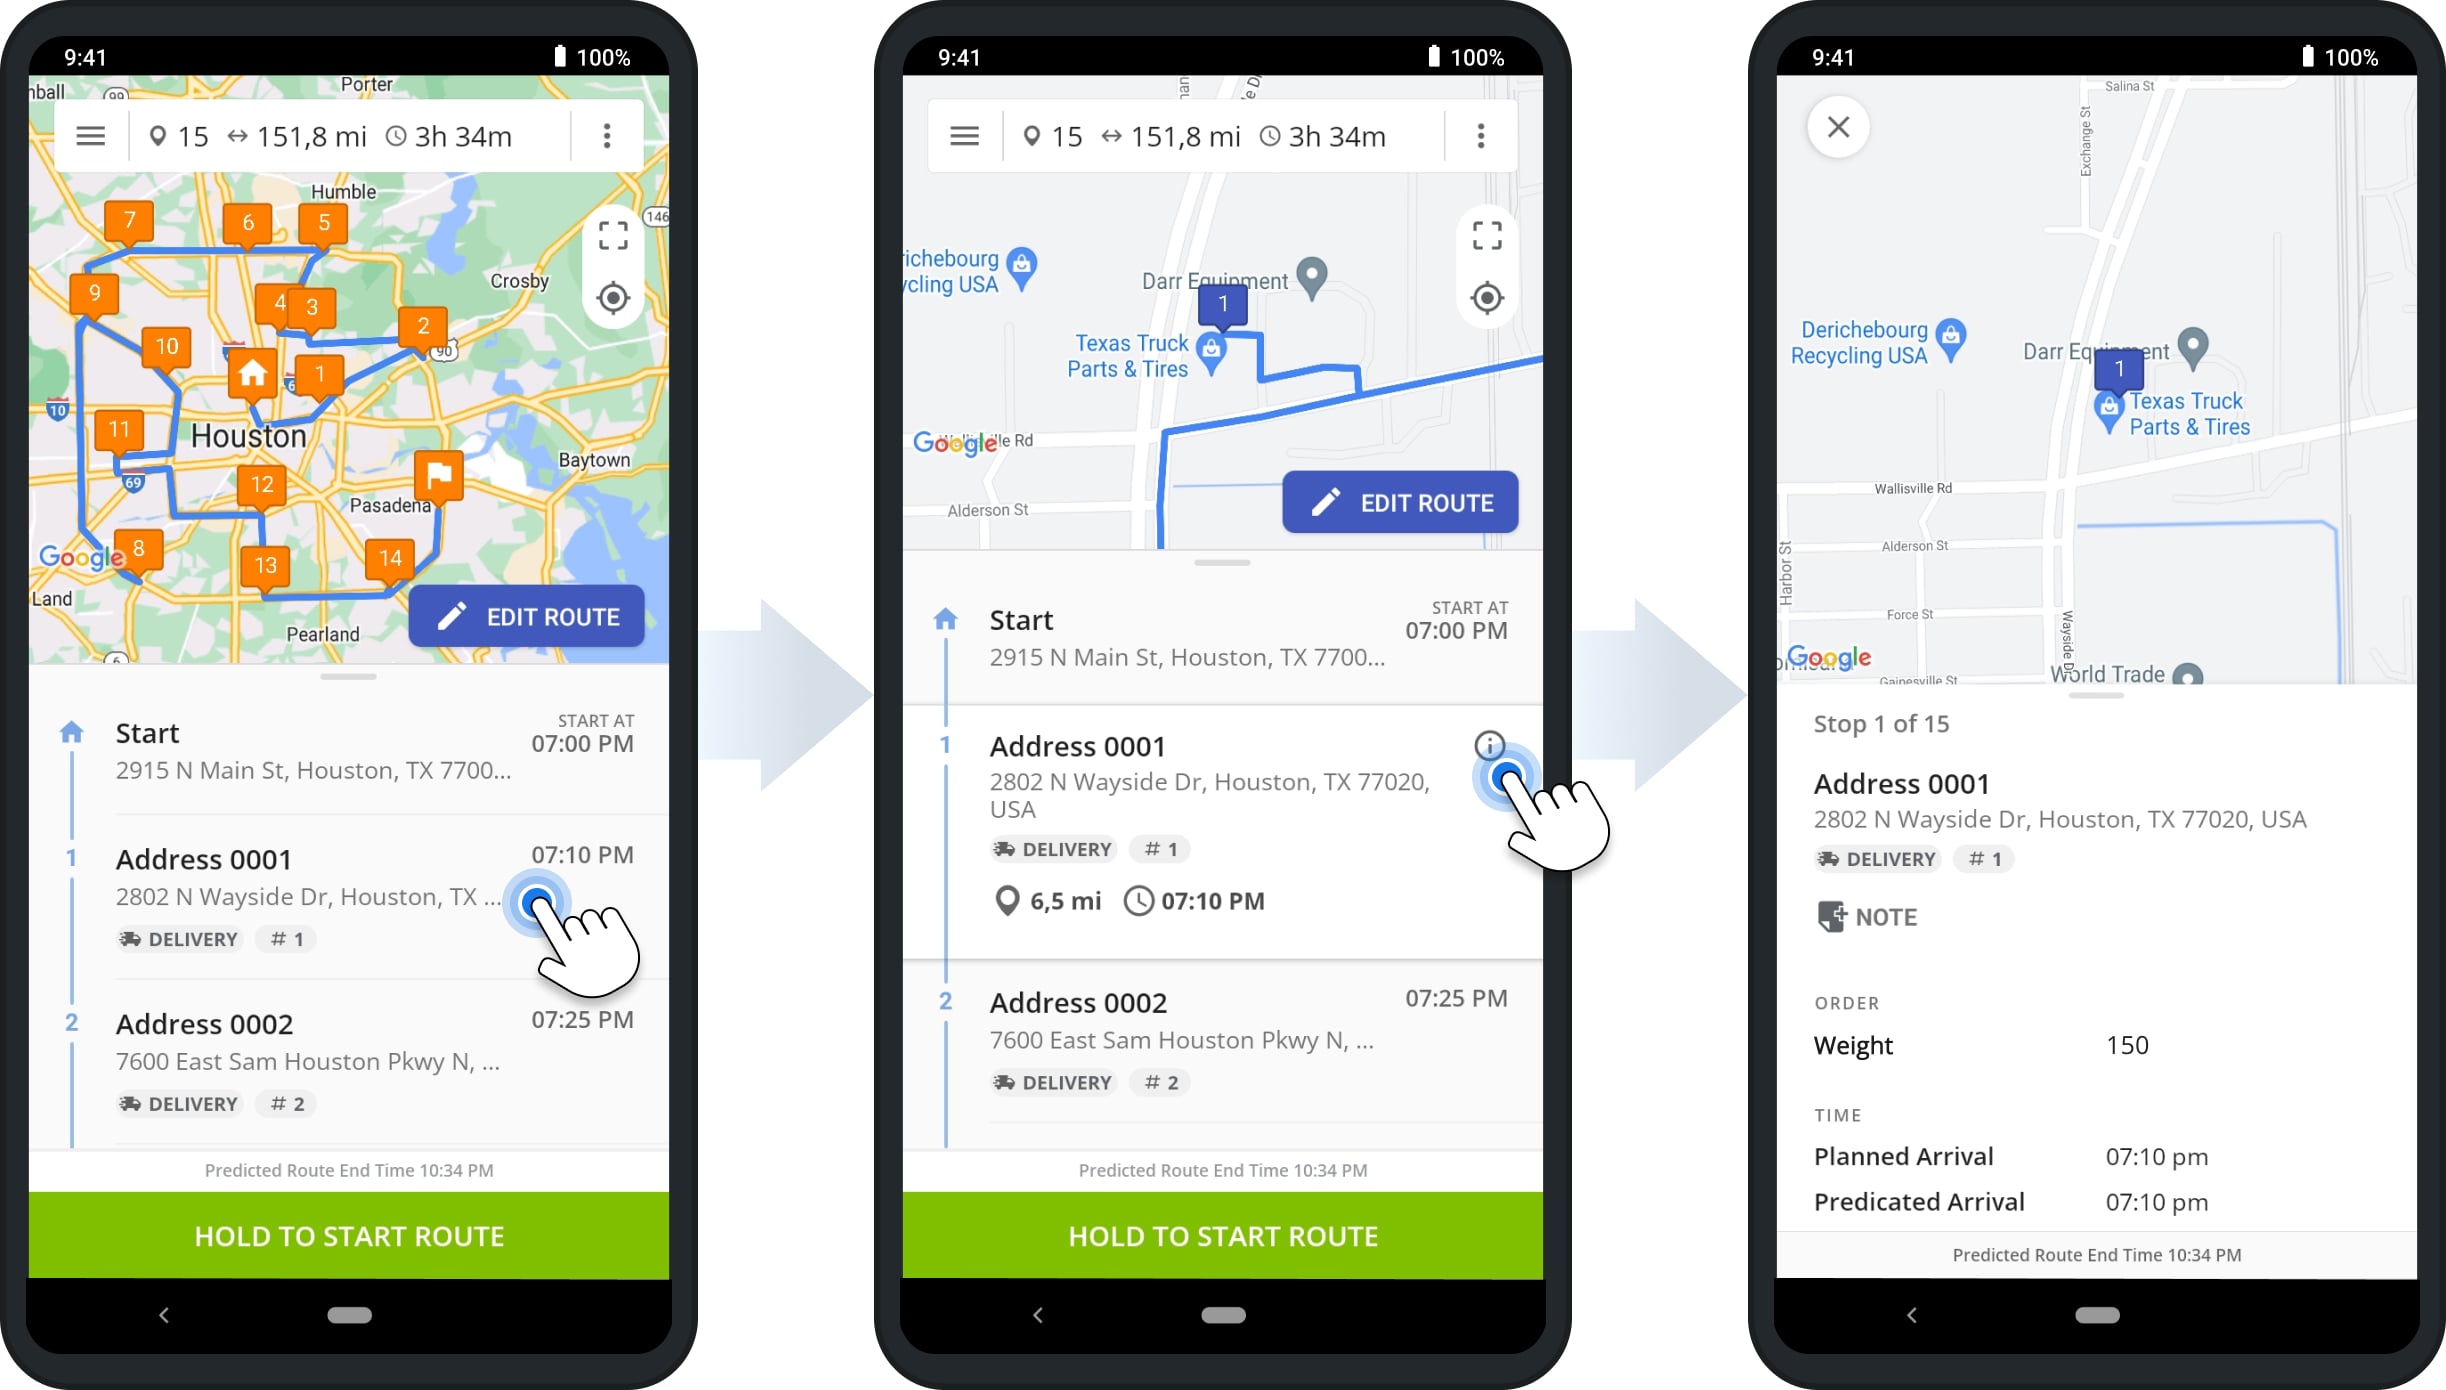 To view Order Weight on the mobile Route Planner App, open the route, tap the preferred destination, and then tap the Information Icon to open the Destination Info.